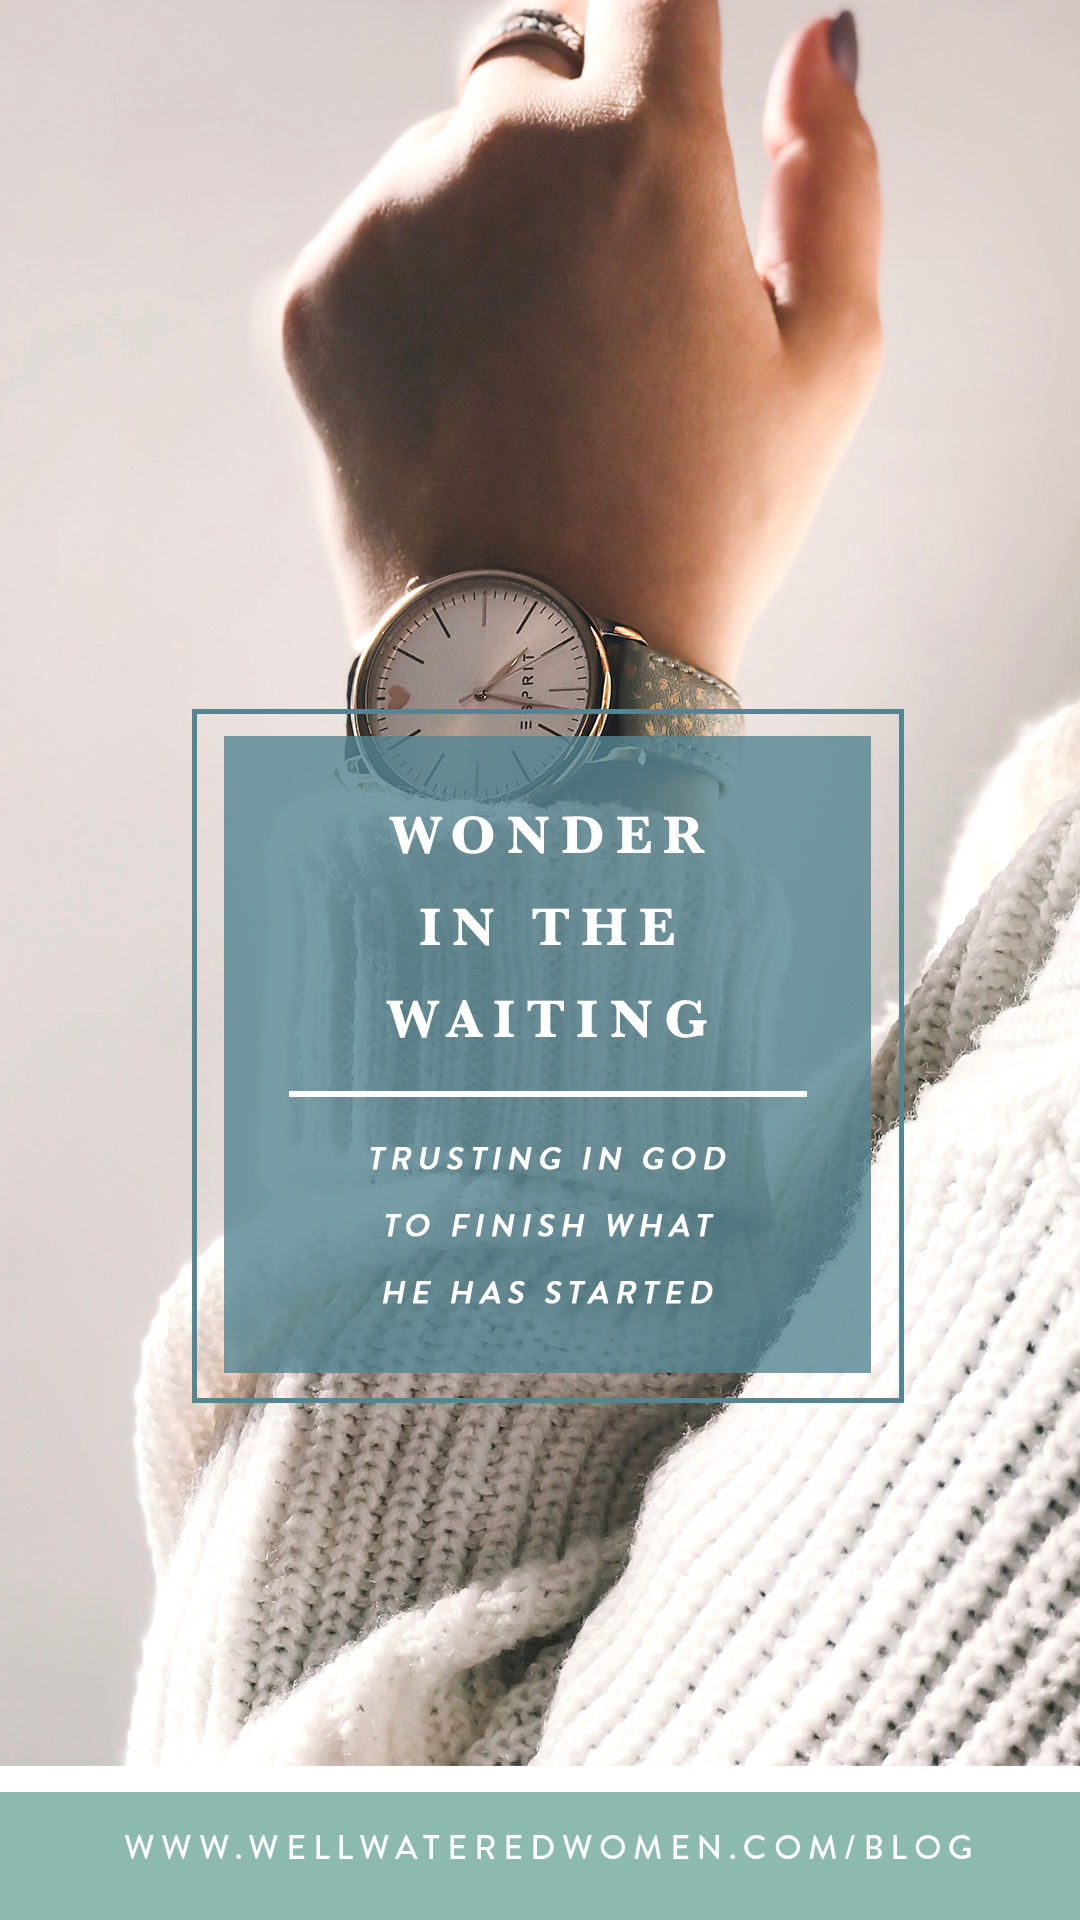 Wonder in the Waiting: How to Hold on When Things Seem Impossible and Trusting God to Do the Impossible - by Well-Watered Women